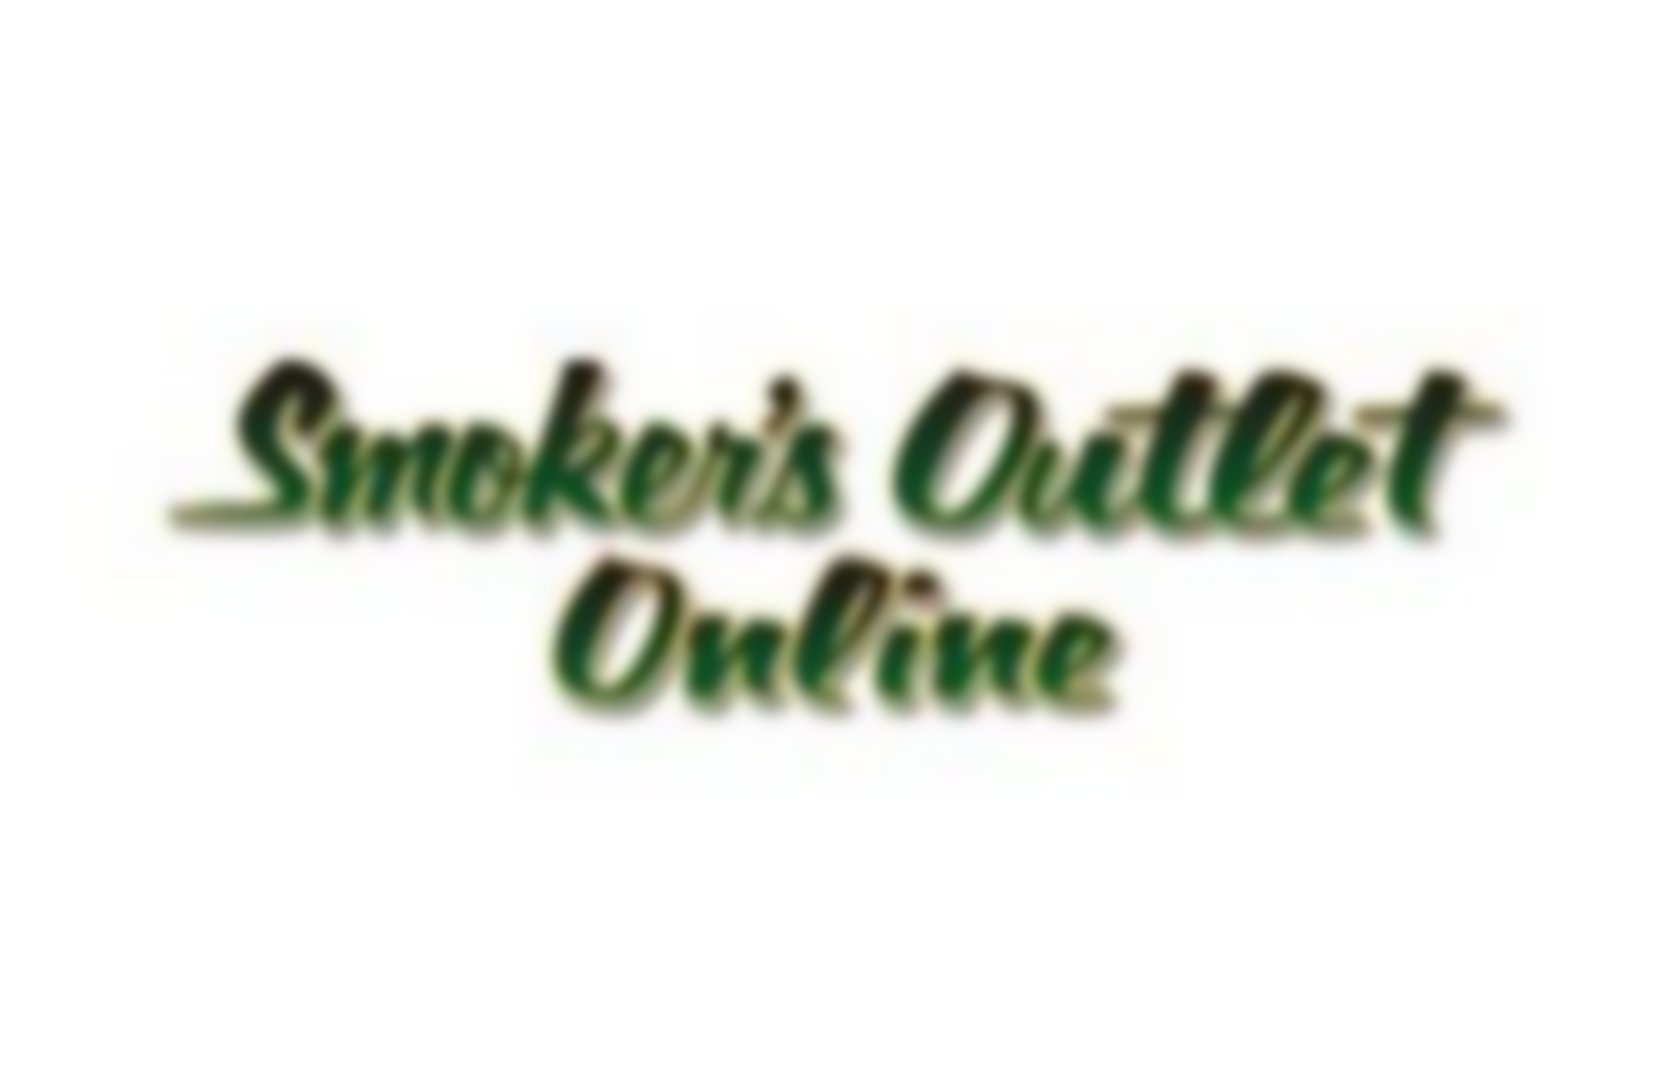 Smoker s Outlet Online smokersoutletonline Pearltrees